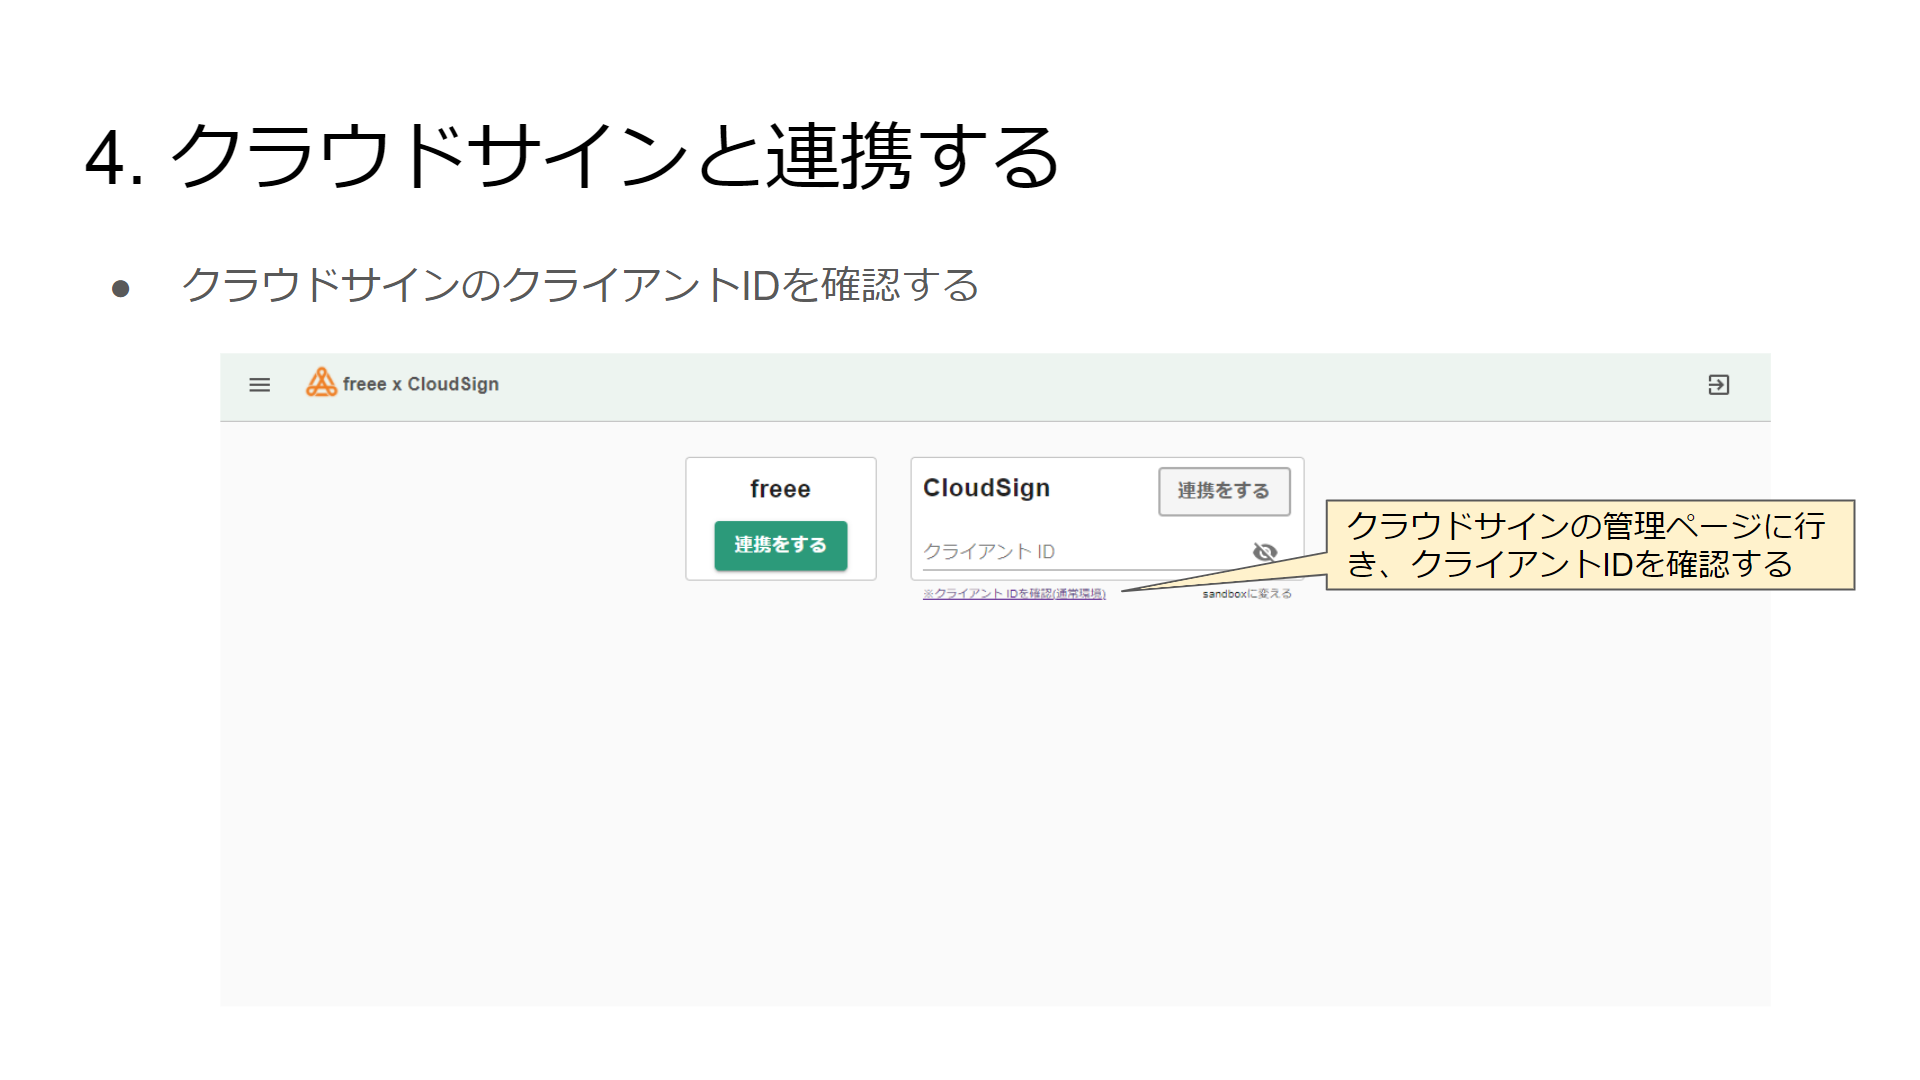 Freee To Cloudsign について Saastainerヘルプページ